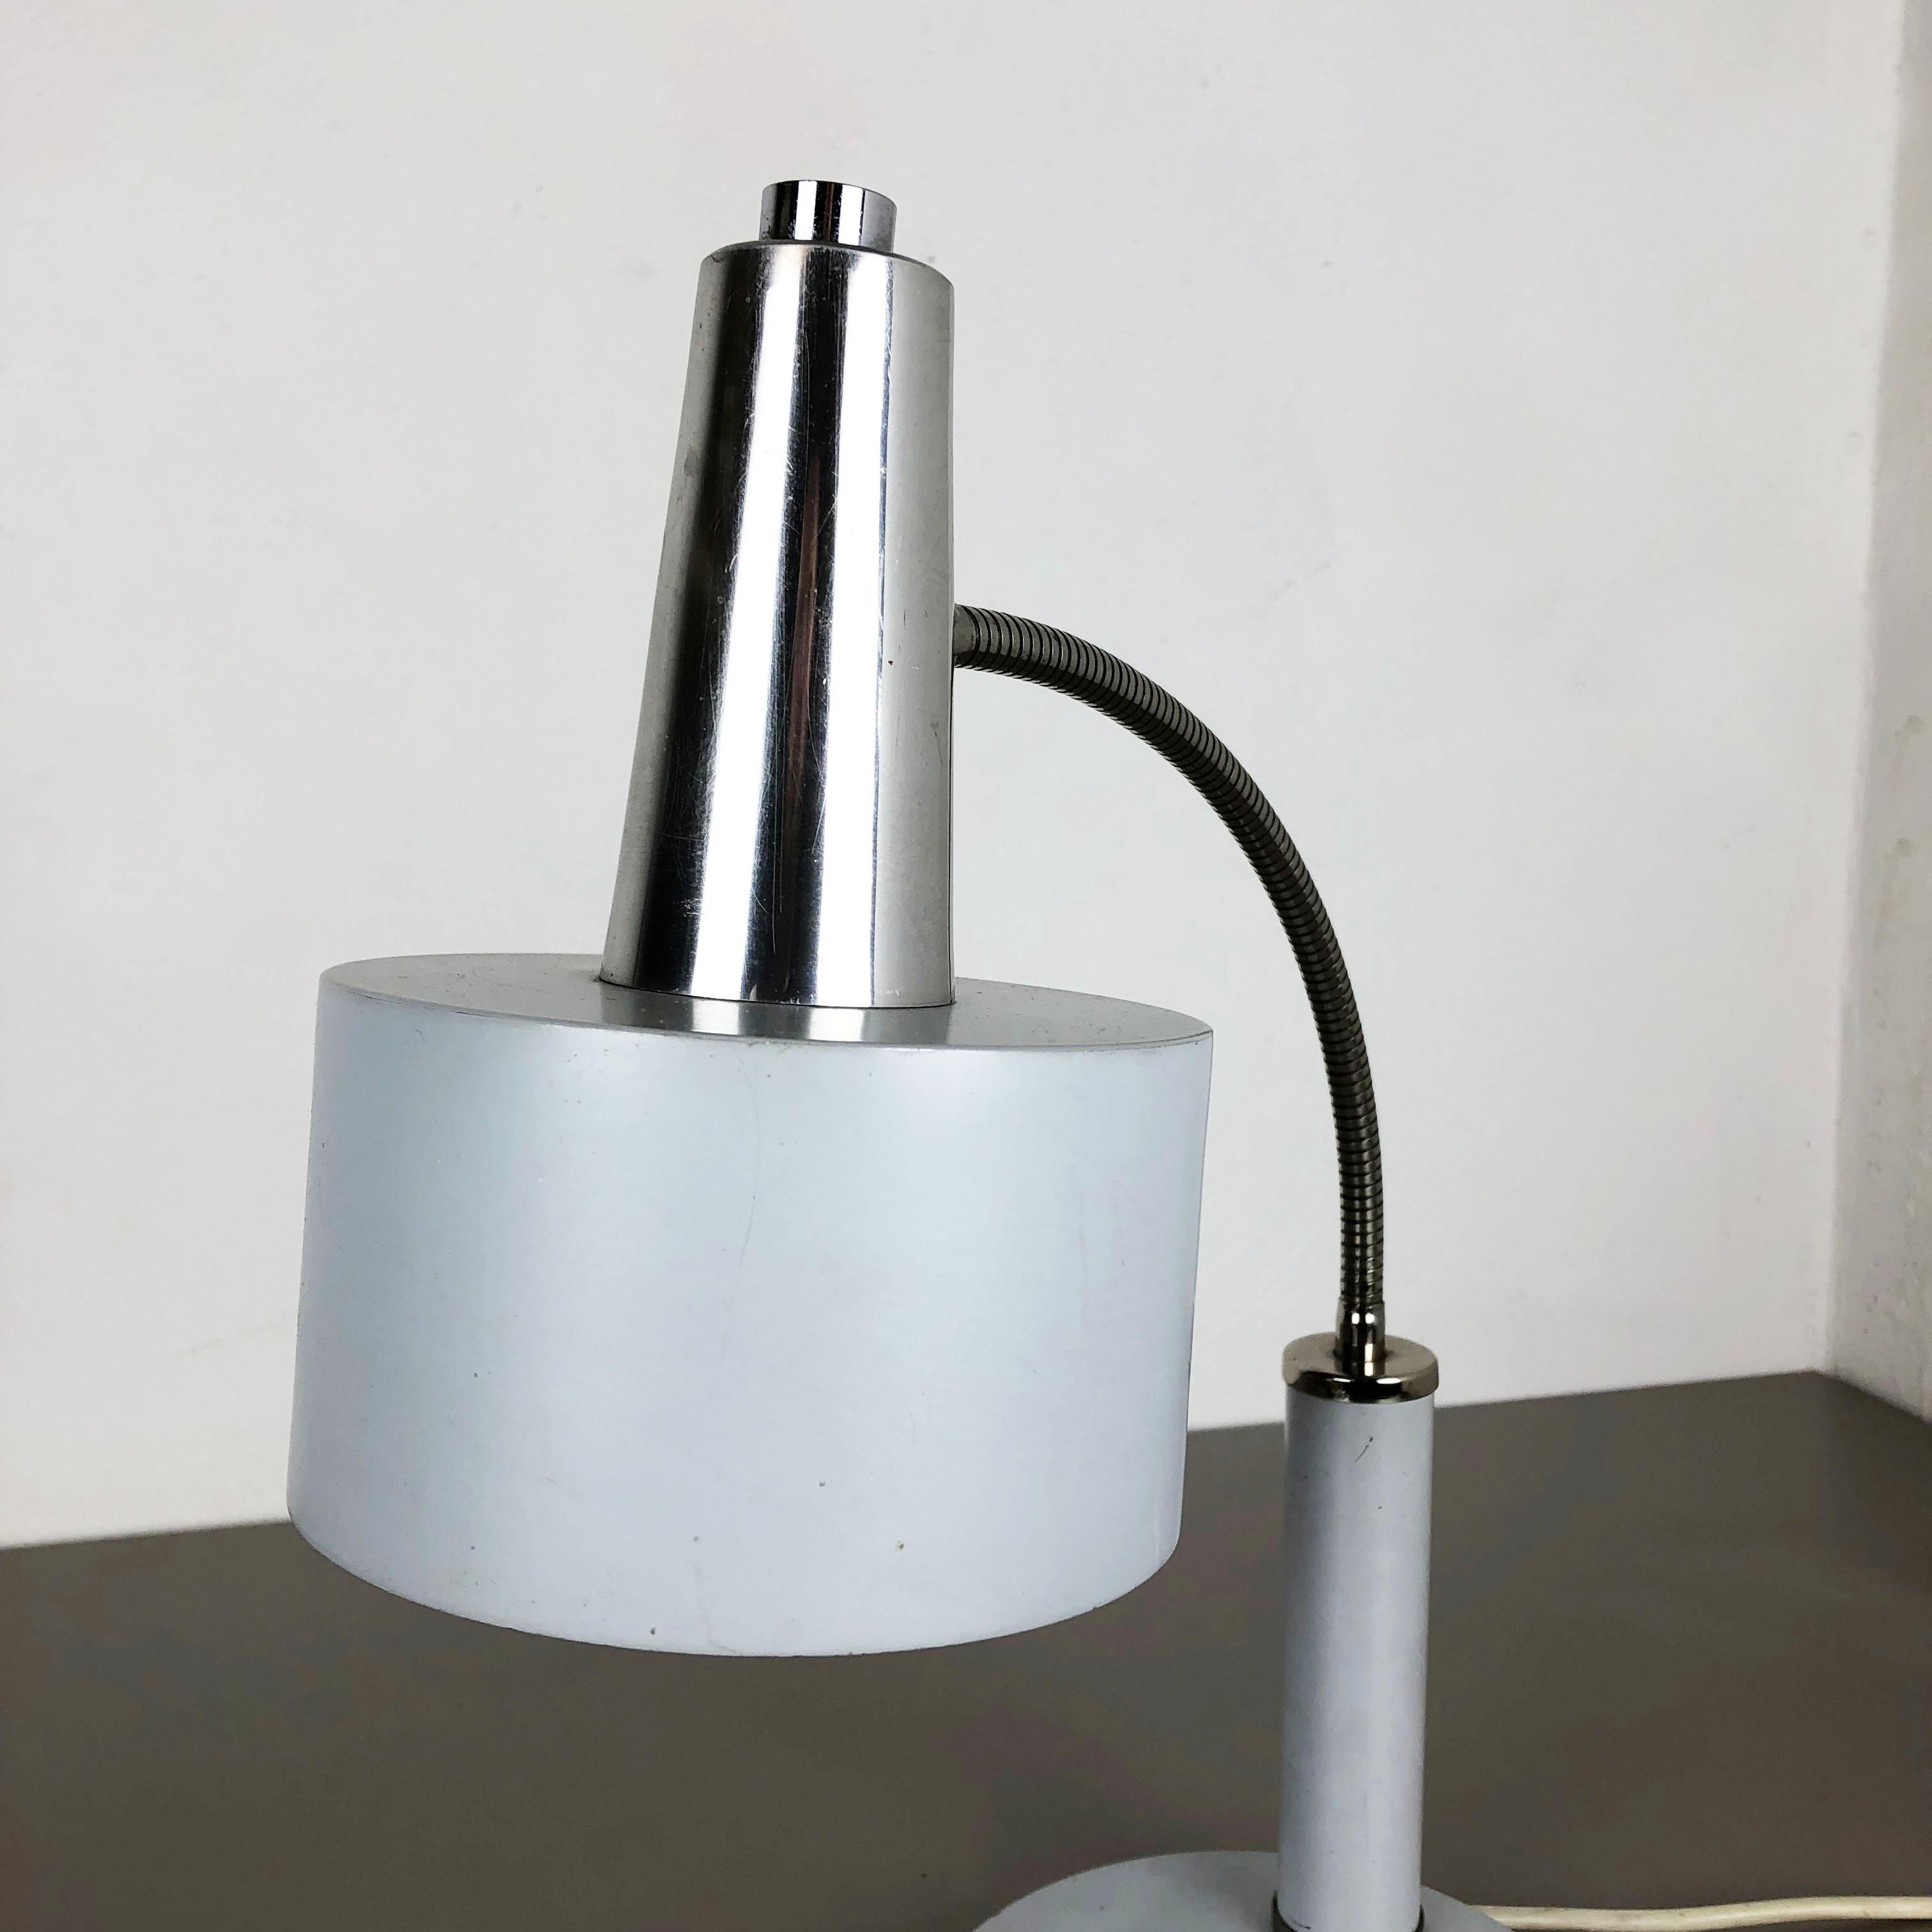 Original Modernist 1960s Metal Table Light Made by SIS Lights Attrib., Germany In Good Condition For Sale In Kirchlengern, DE